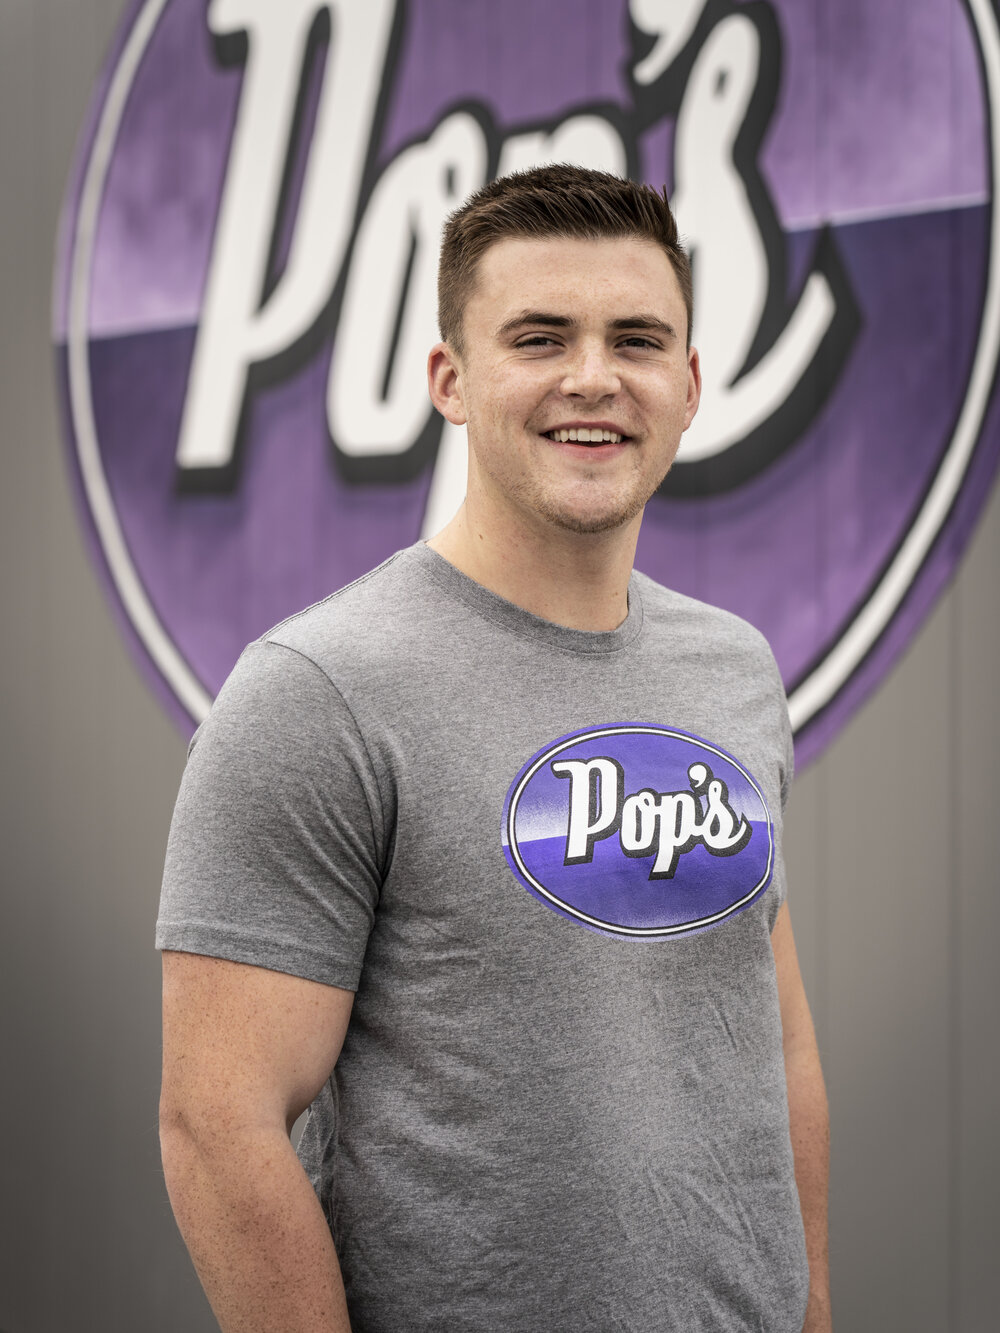 Personal Trainer Spencer at Pop's Gym in Fort Worth